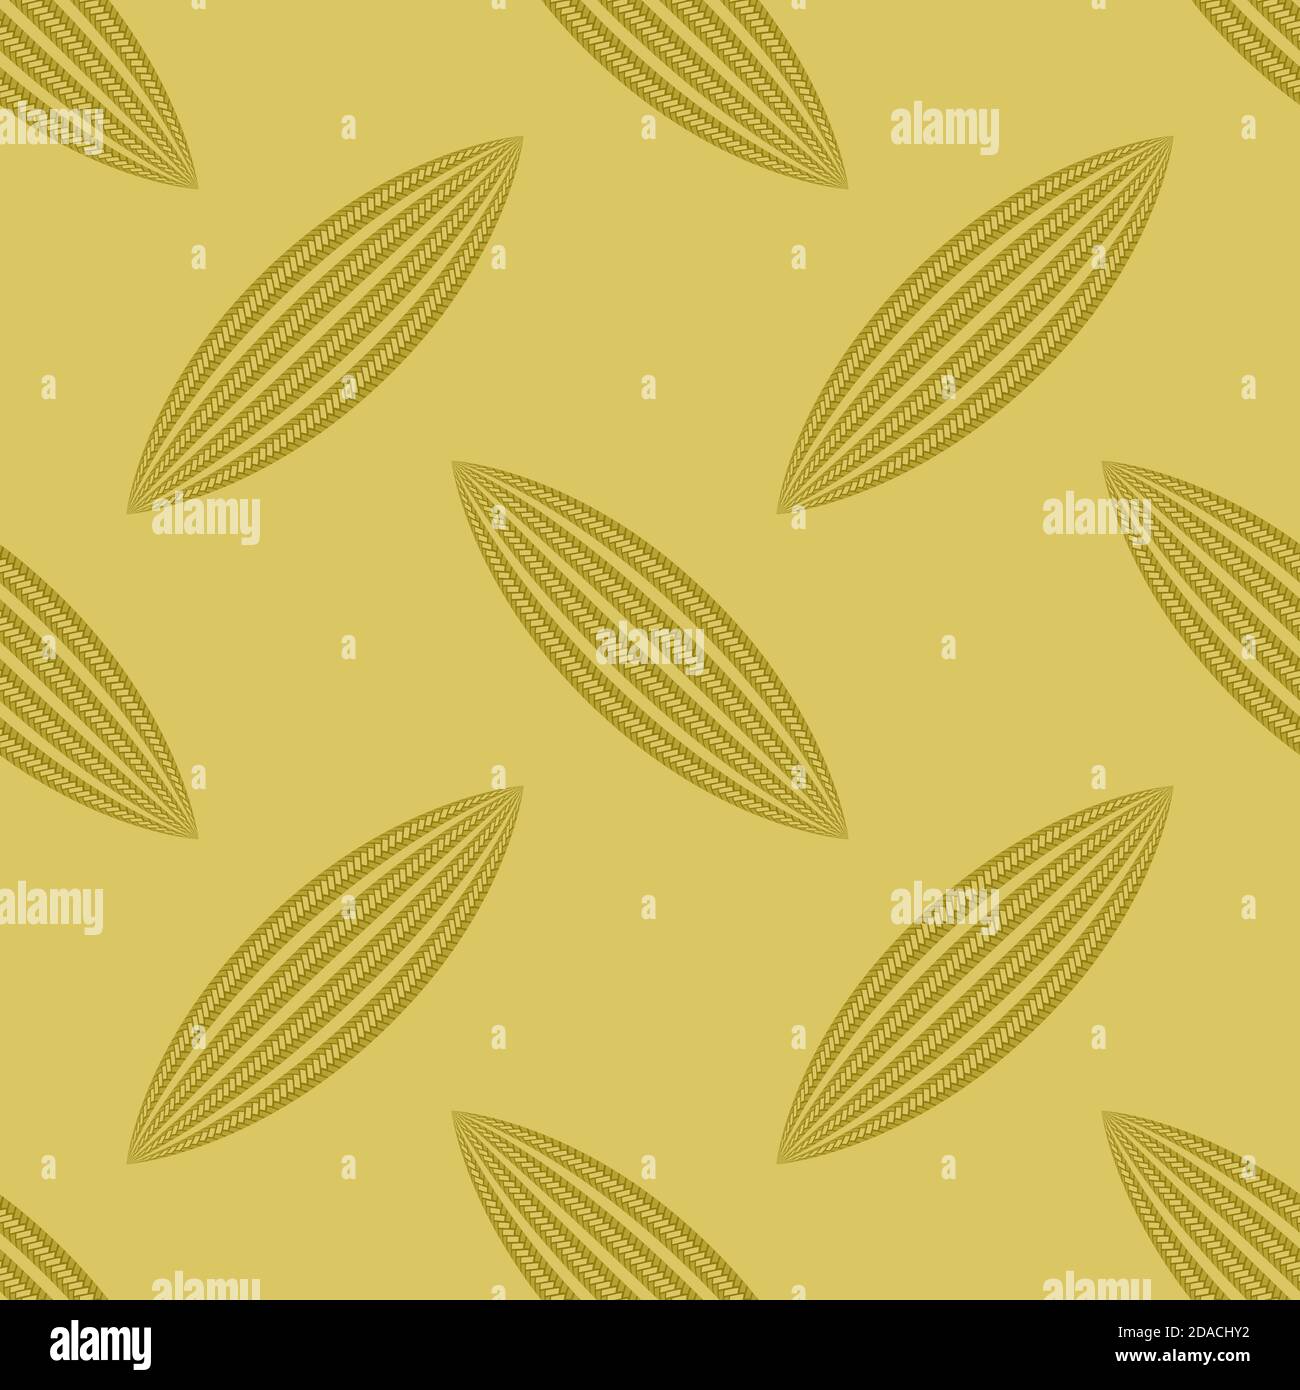 Rope Seamless Pattern with Knots on Yellow Backround Stock Vector